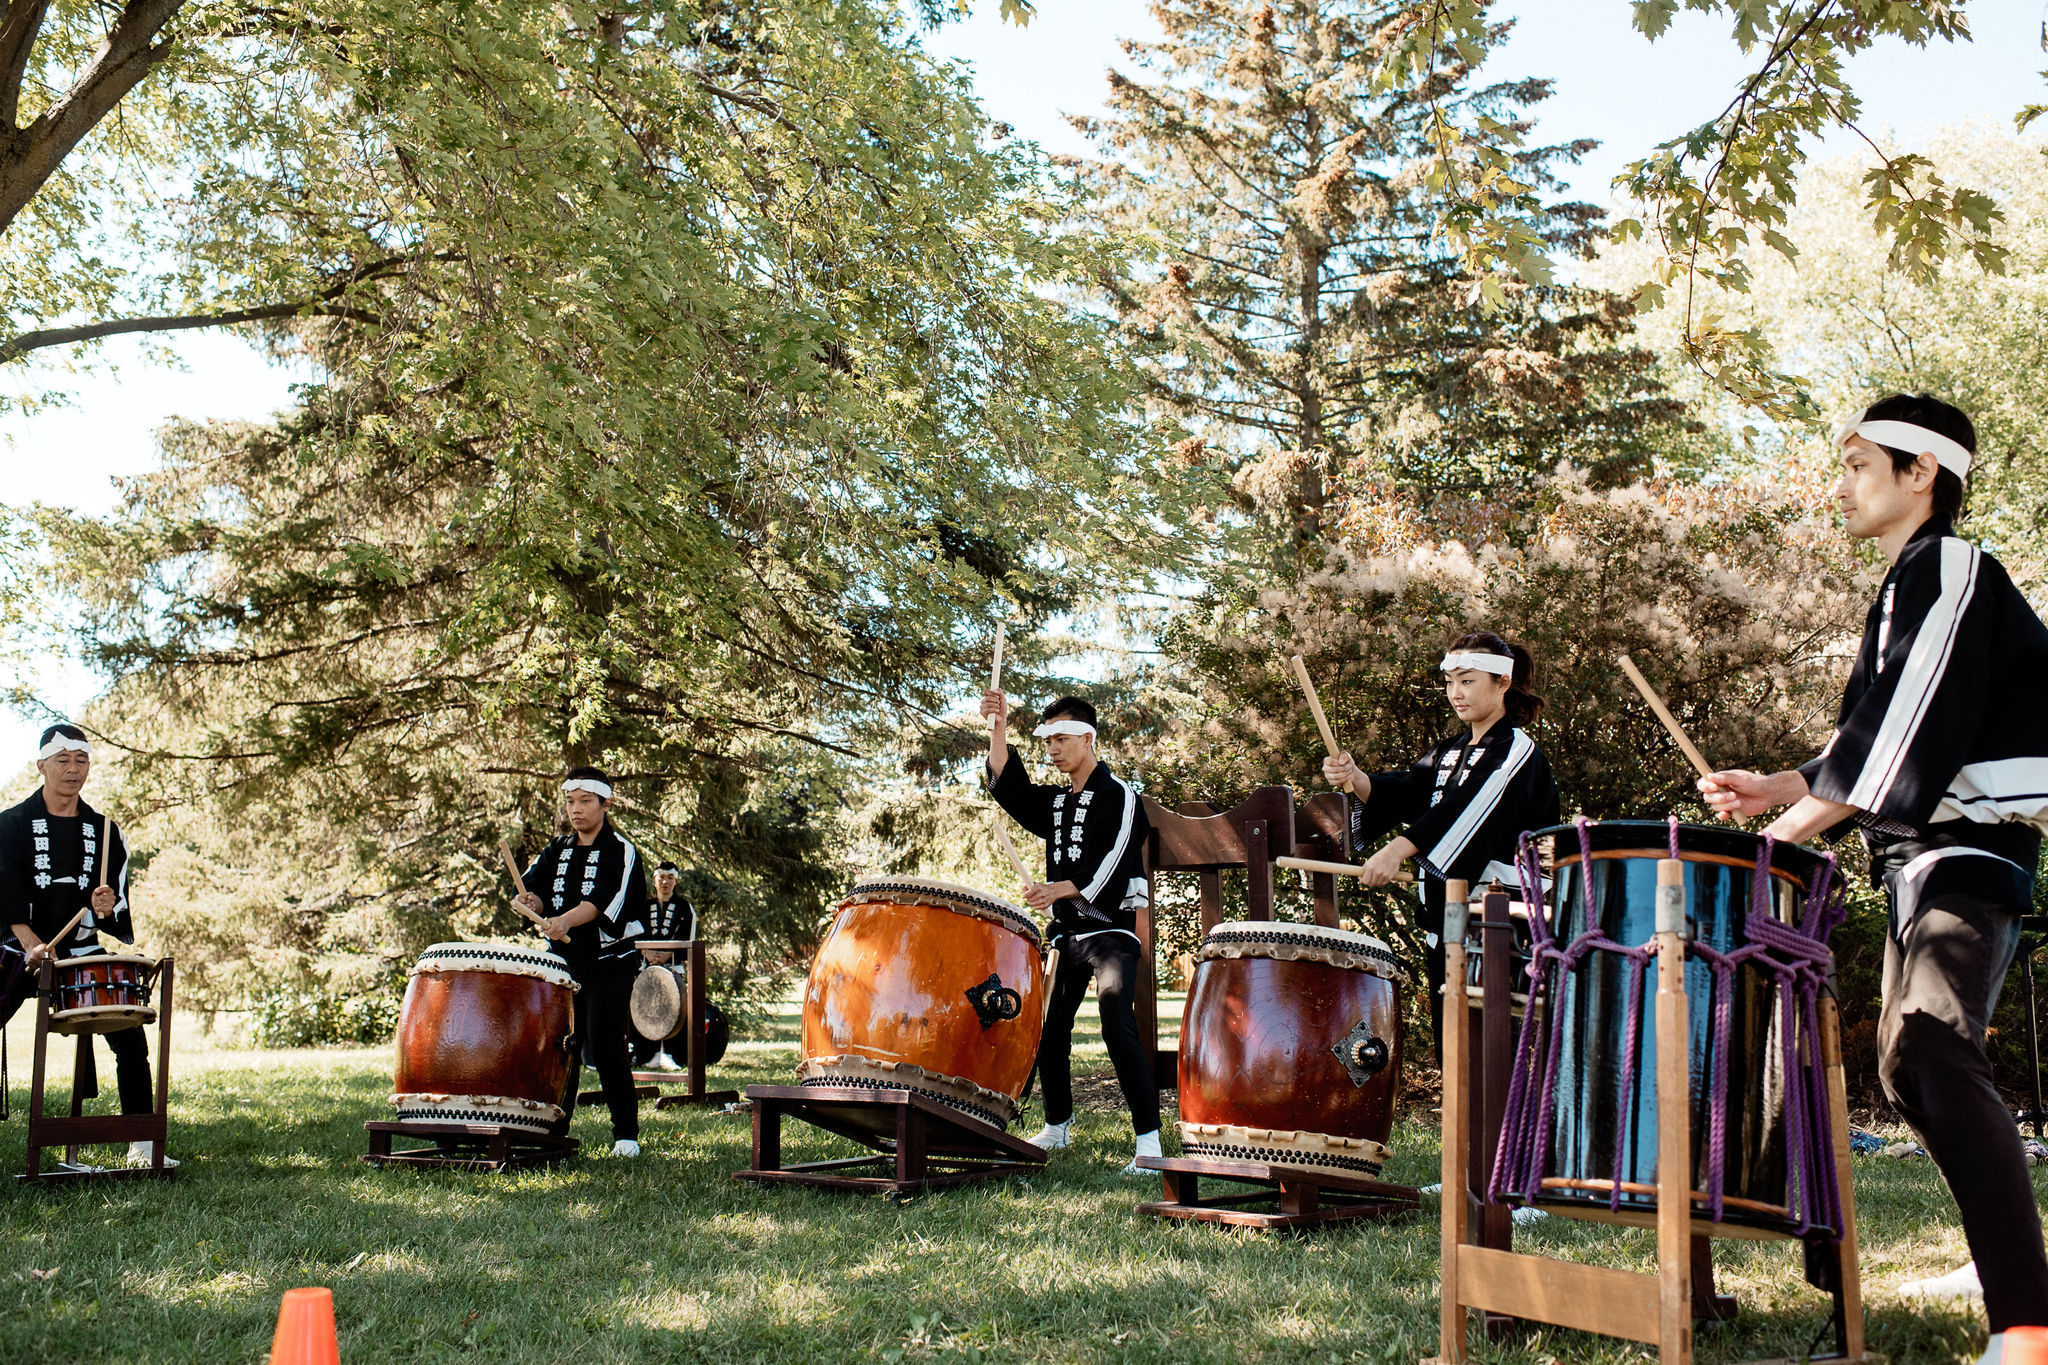 A group of five drummers play different large percussion instruments under the trees.